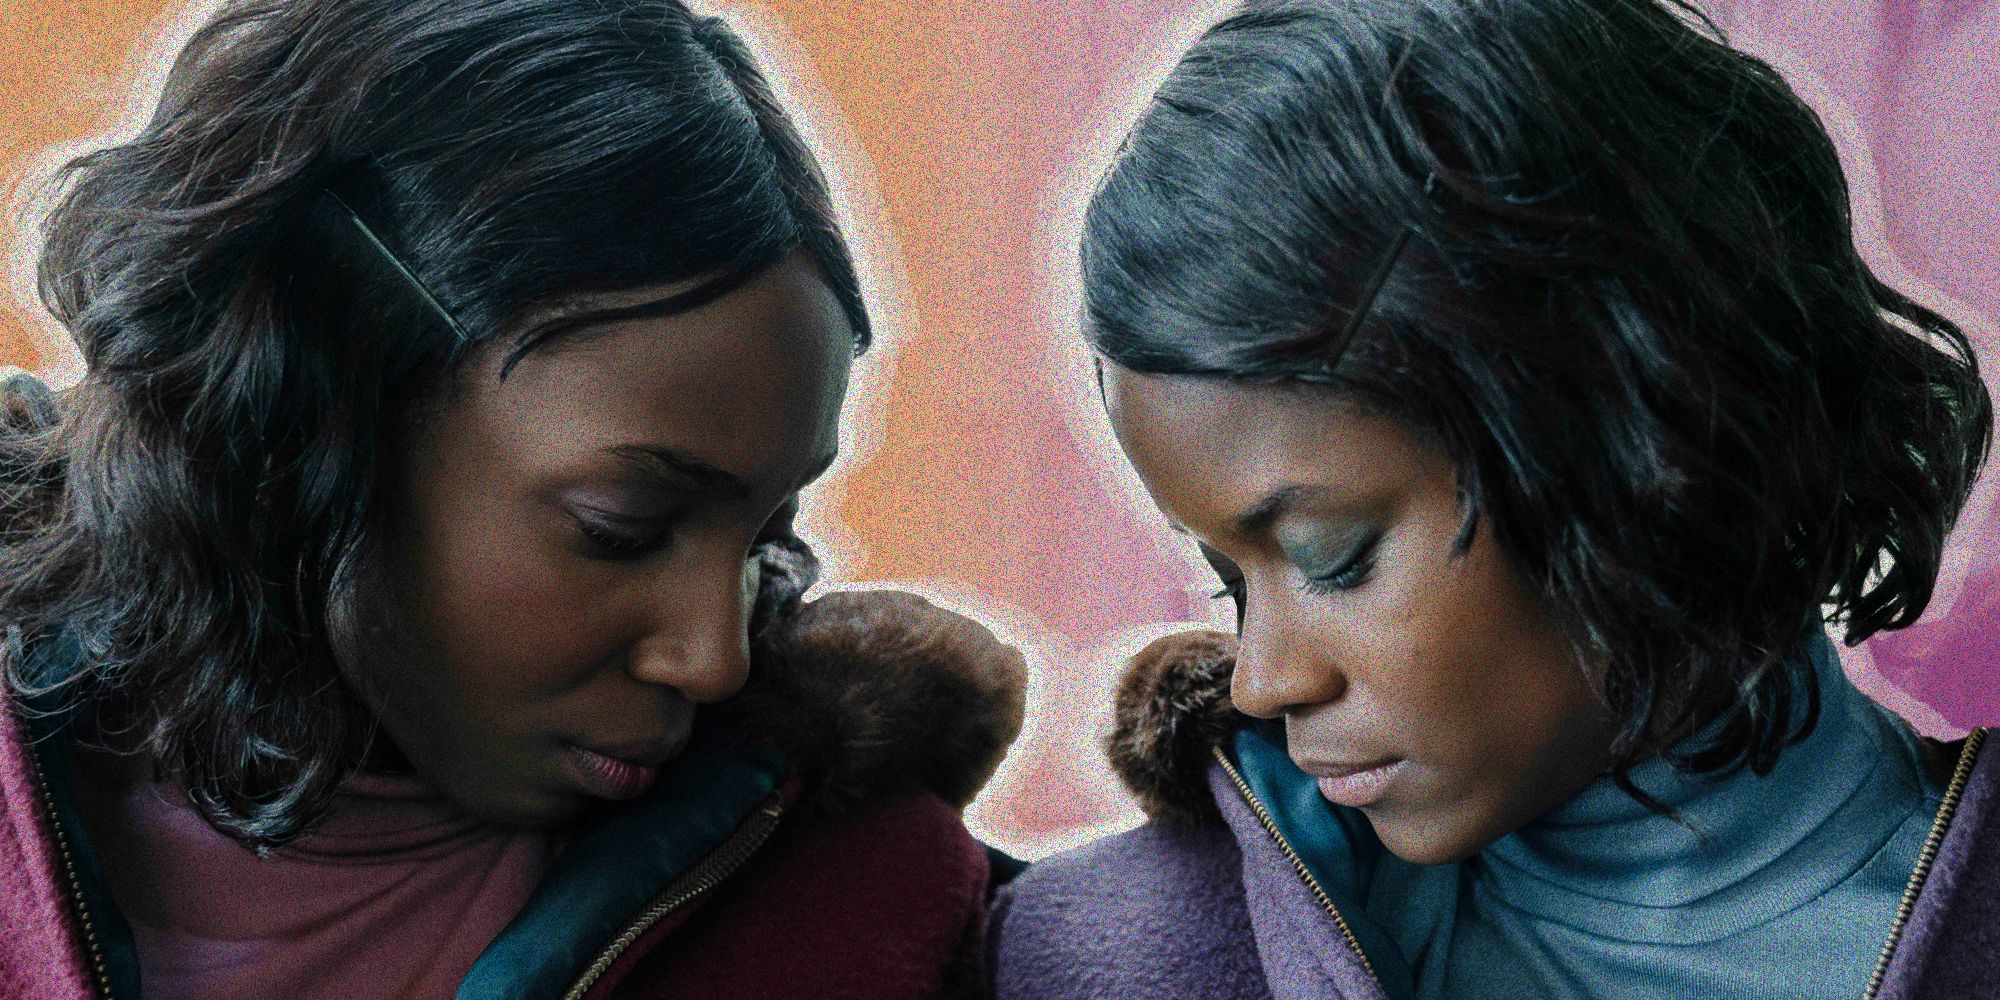 stars who portray "the silent twins" talk with shondaland